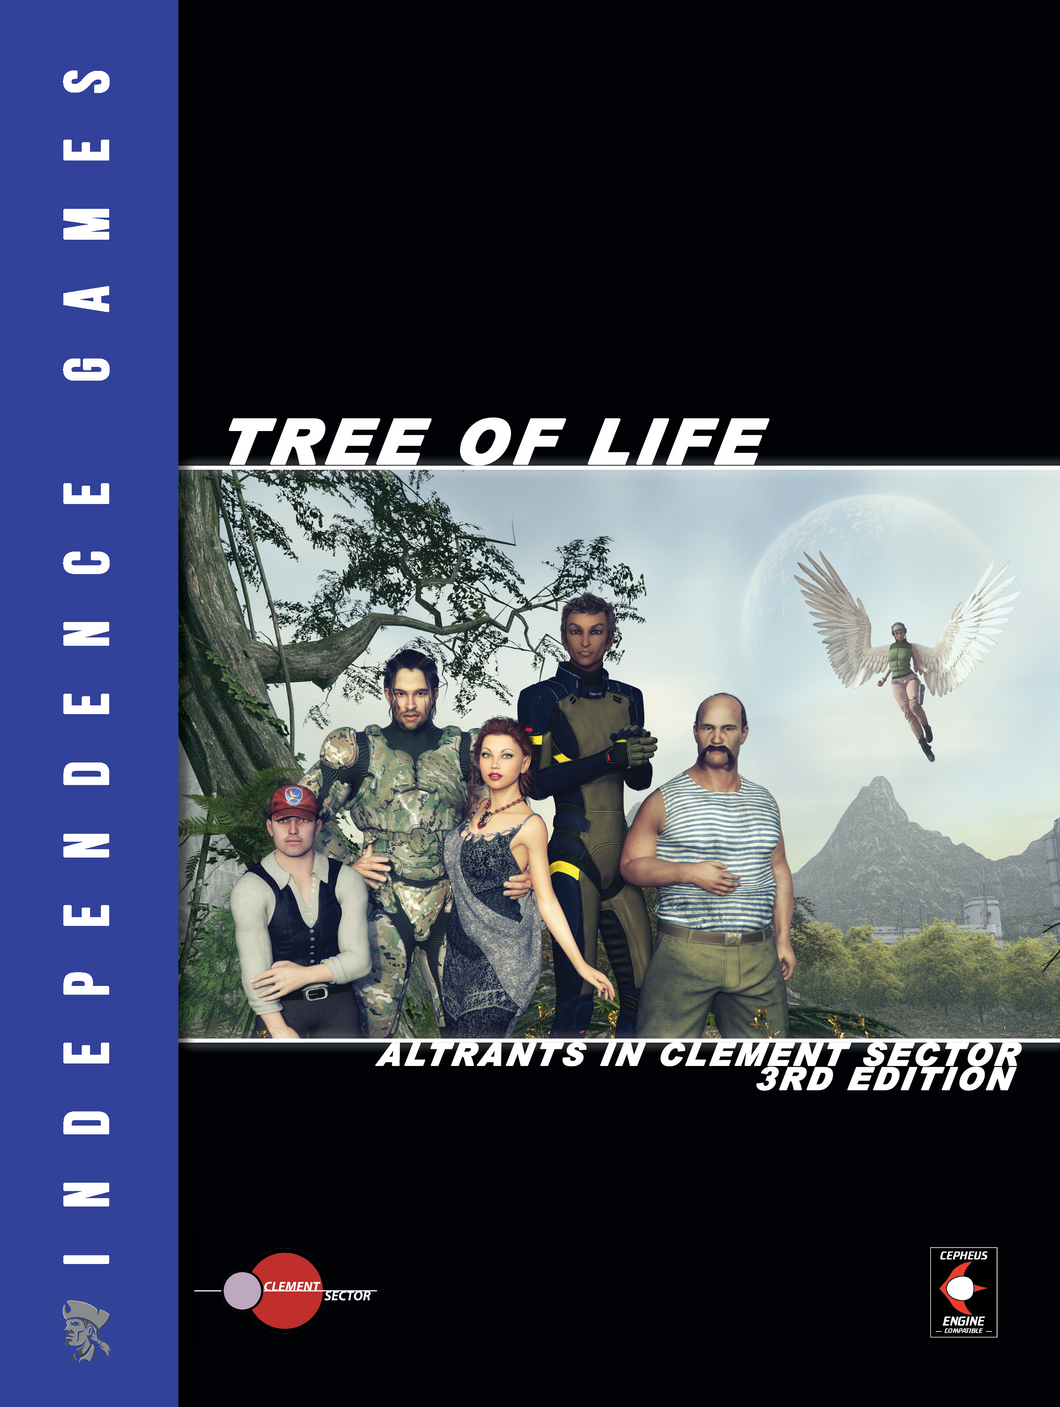 Tree of Life: Altrants in Clement Sector Third Edition